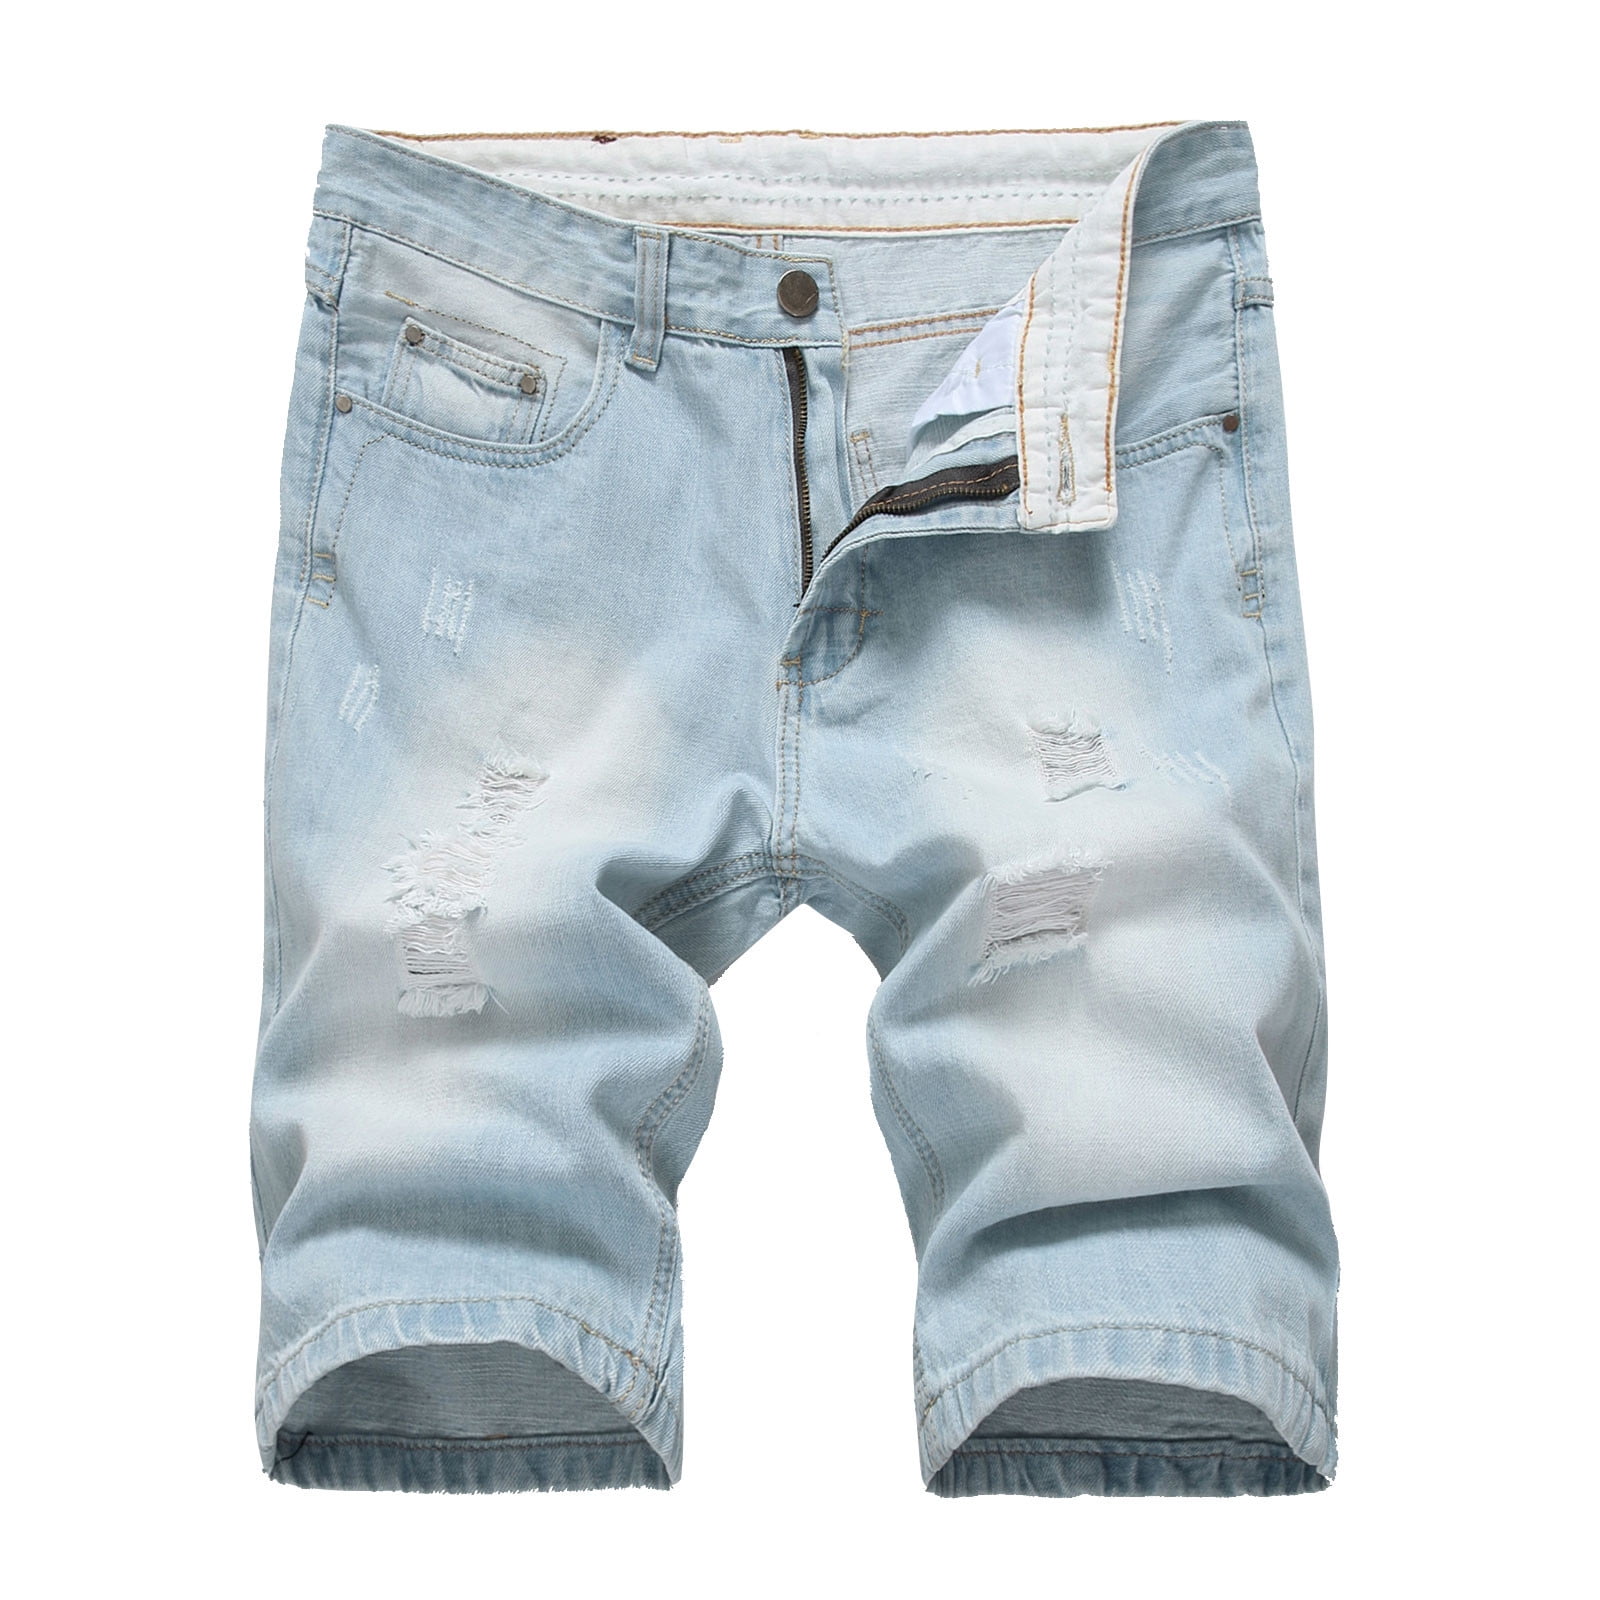 Savings Clearance! PEZHADA Jean Shorts,Mens Shorts,Ripped Denim Trunks Stretchy Washed Jeans Trunks Cut-Off Classic Fit Biker Jeans Trunks White - Walmart.com